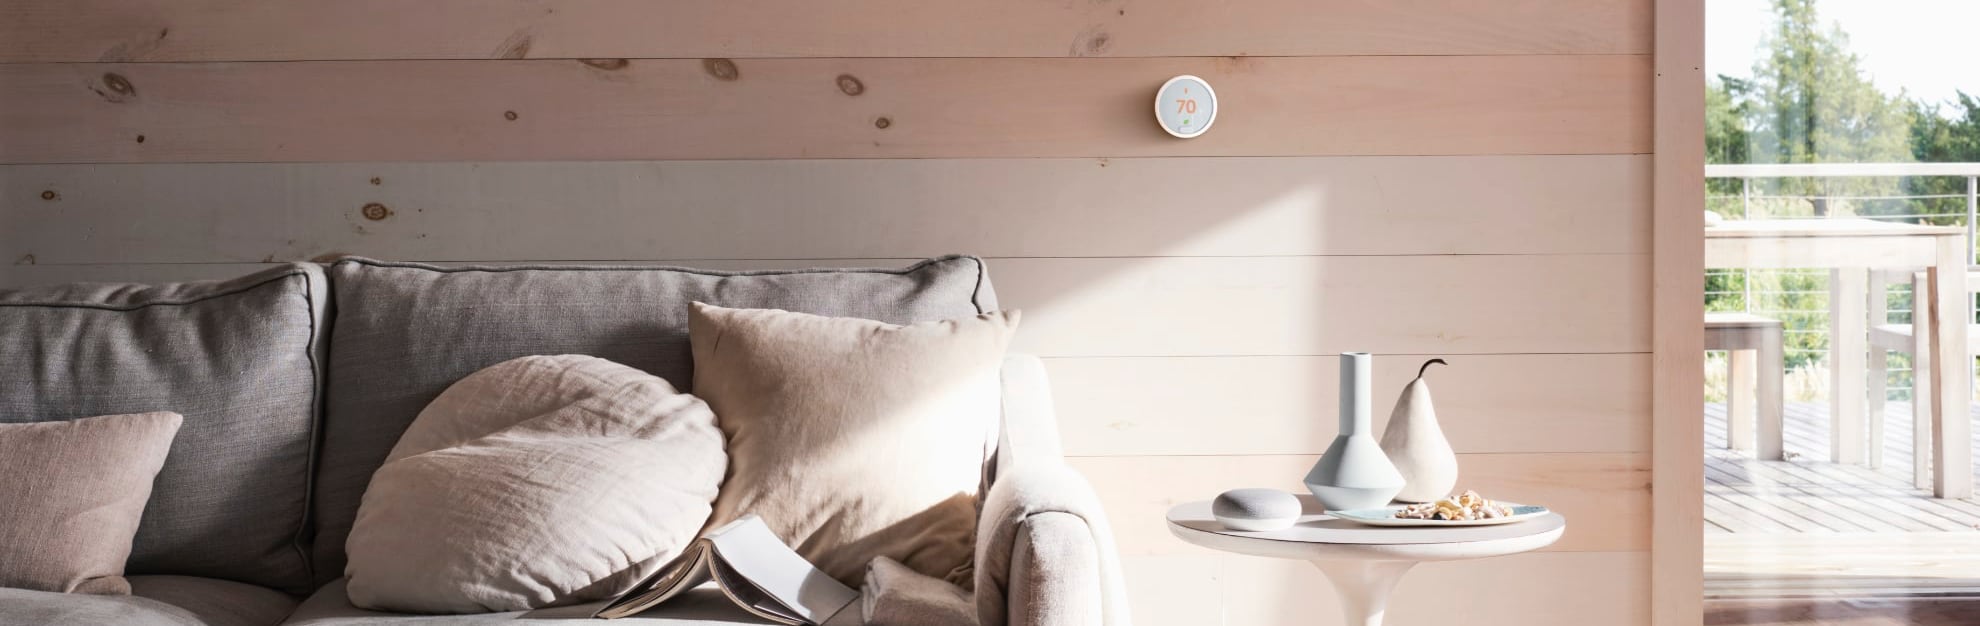 Vivint Home Automation in Madison